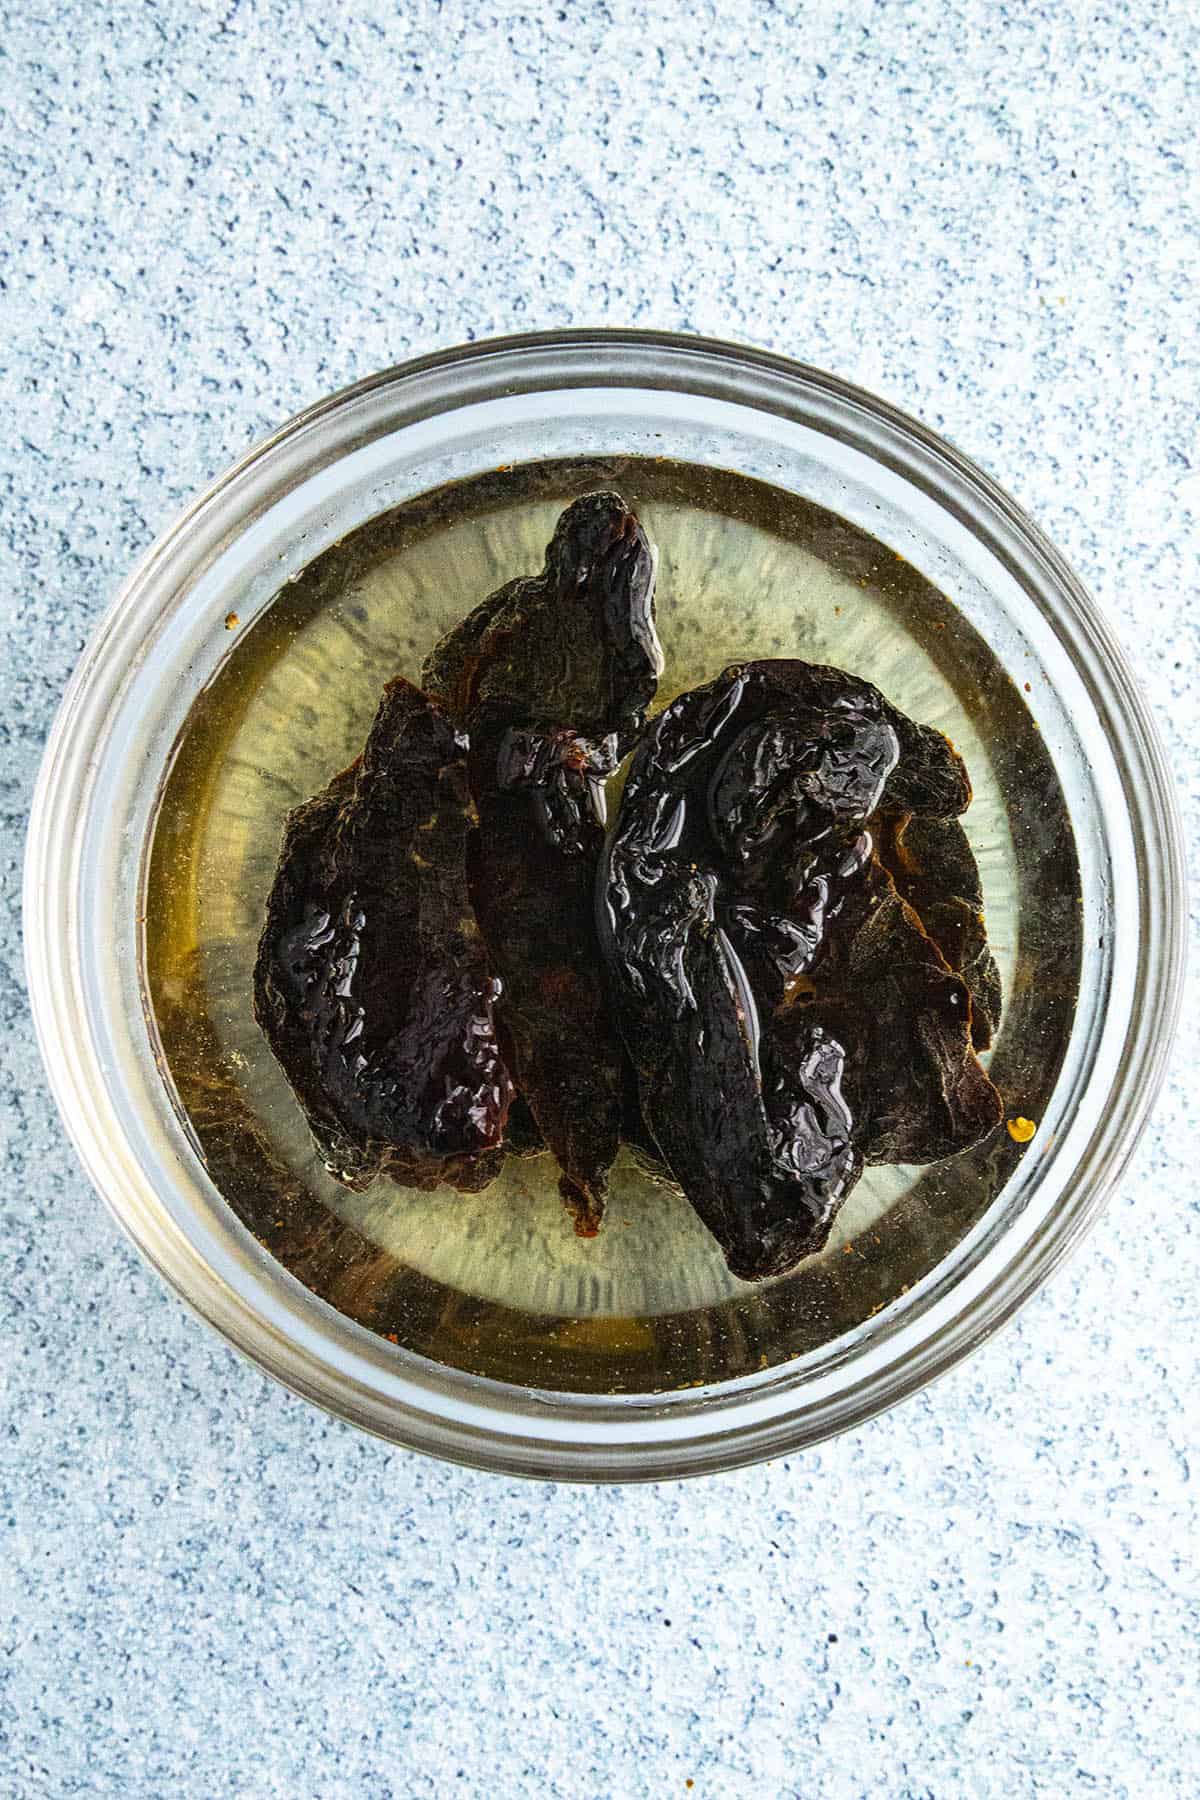 Soaking dried peppers to soften